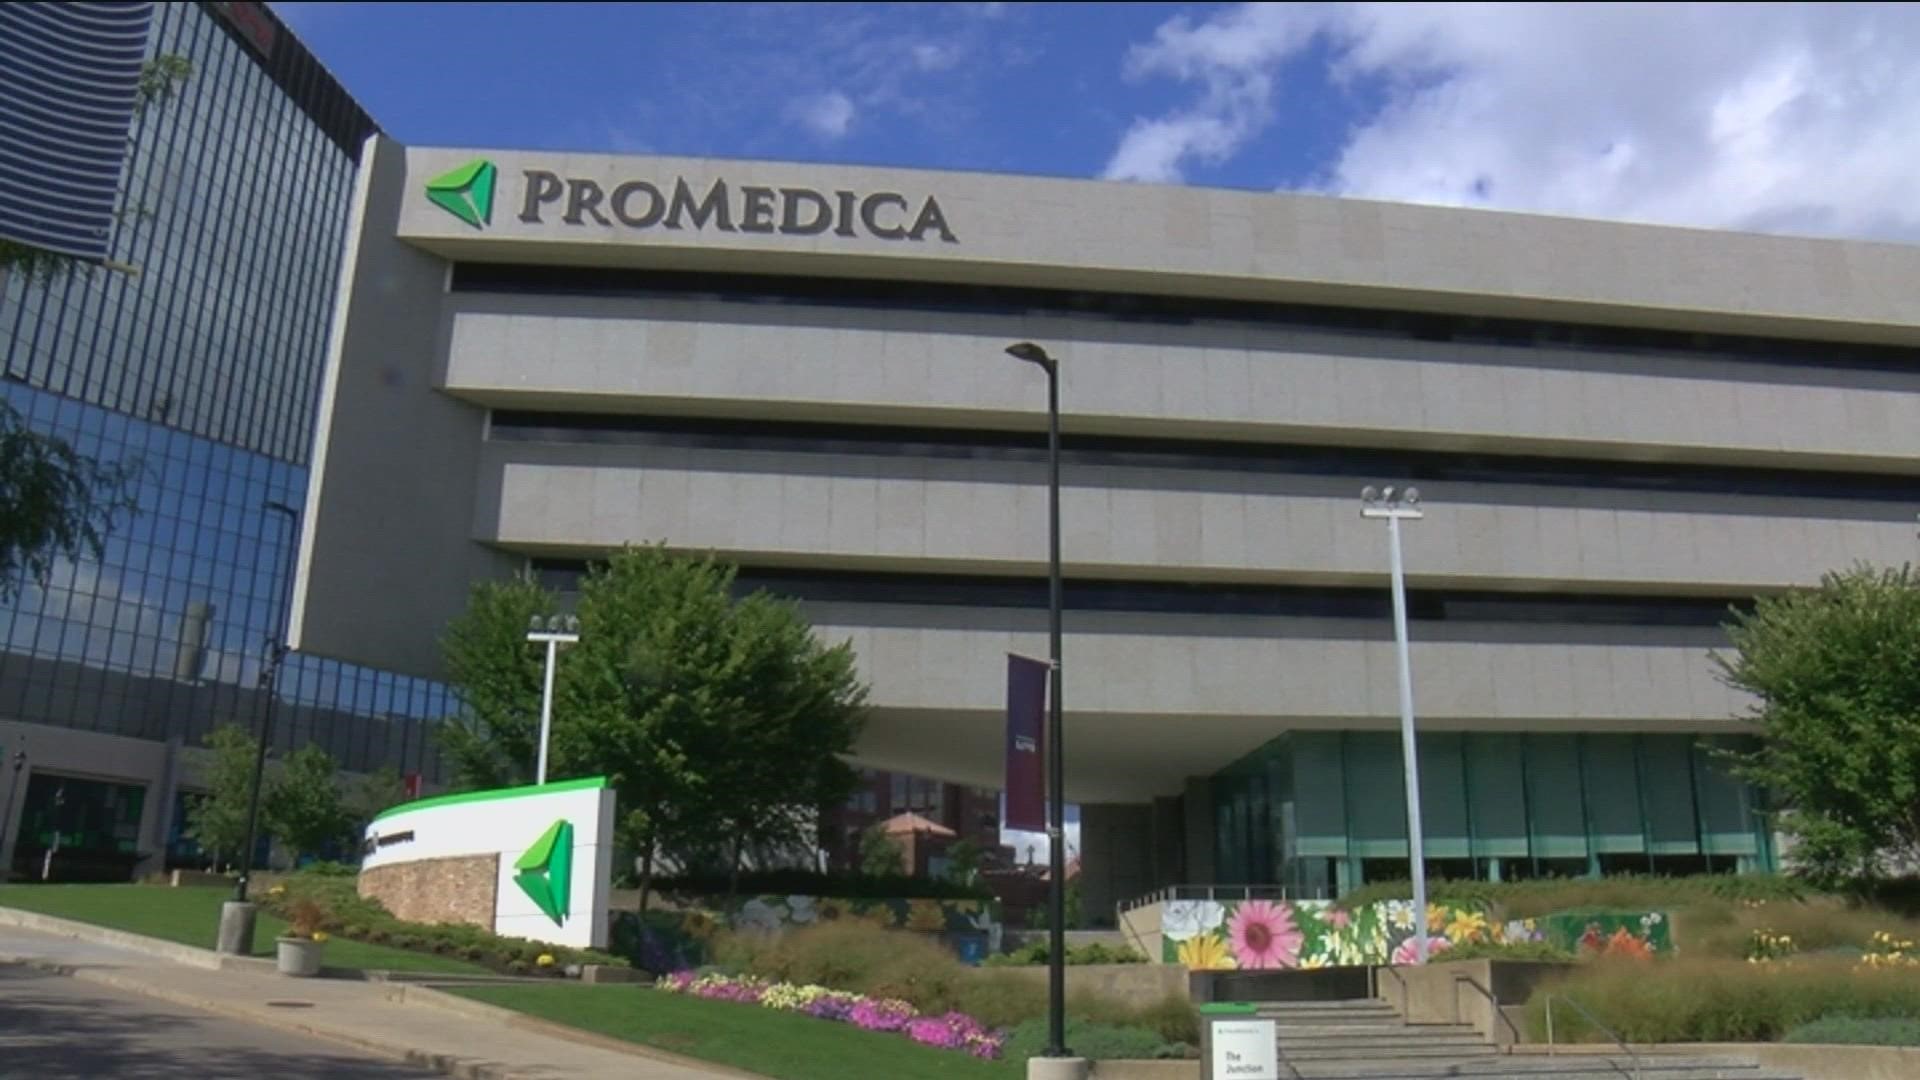 Attorney General Dave Yost announced Tuesday that ProMedica has agreed to make two outstanding payments to the medical school.